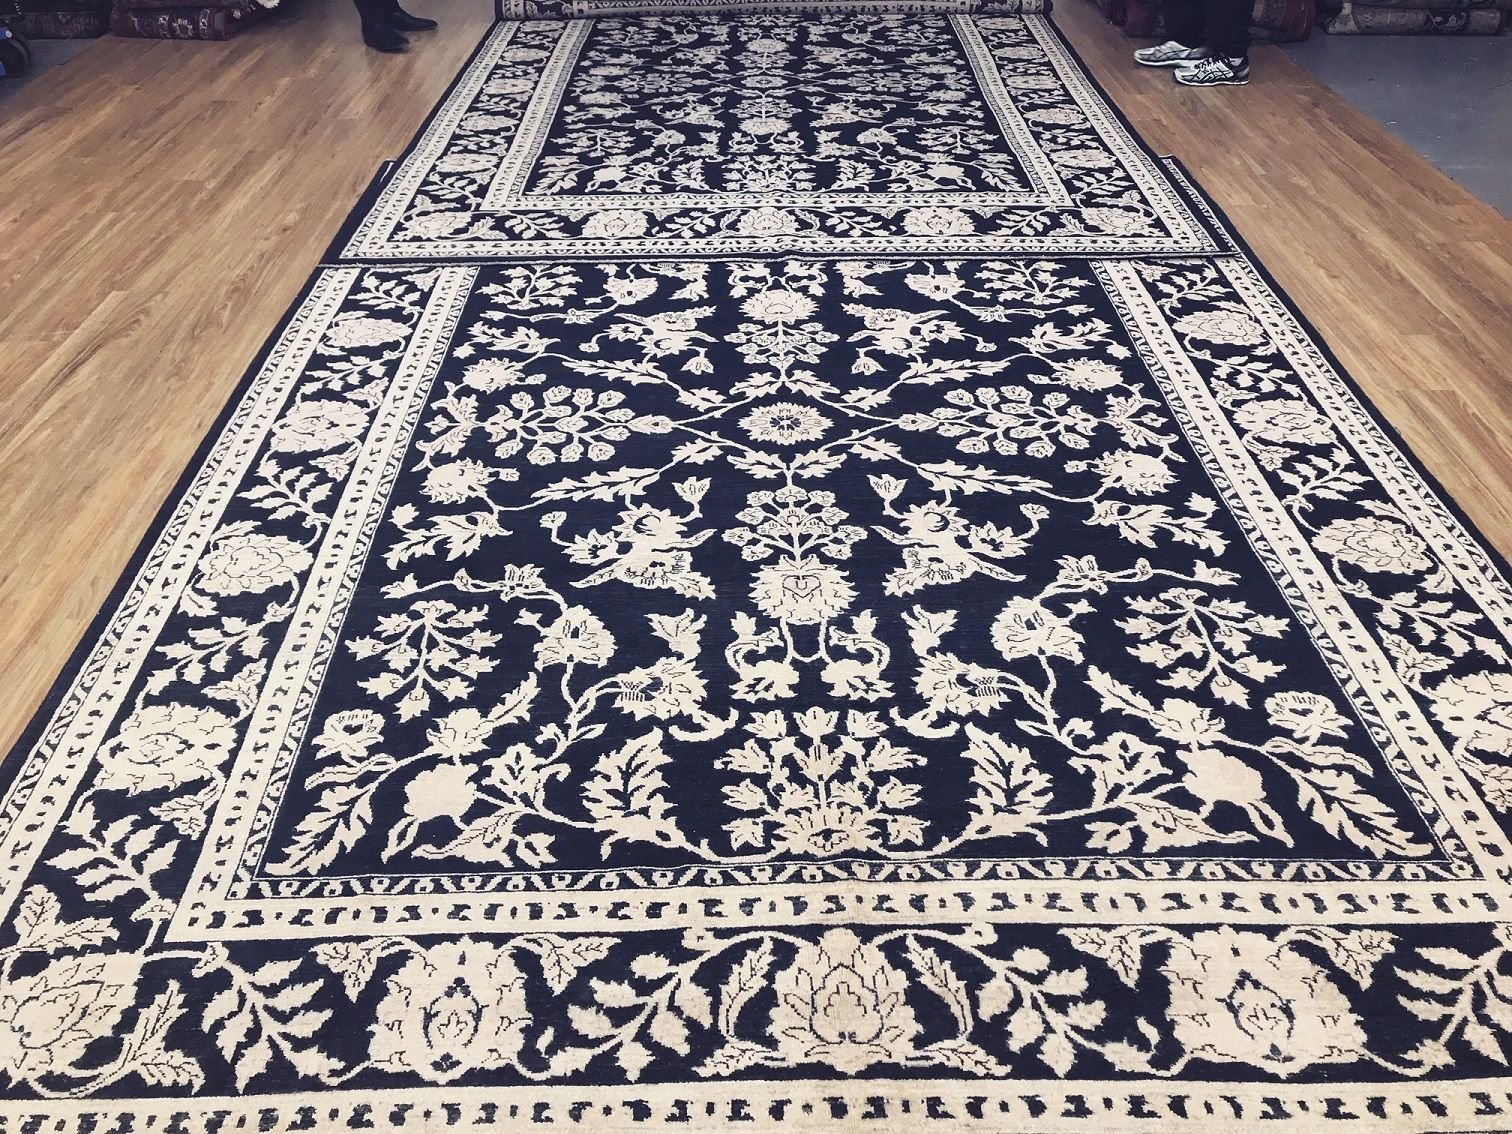 Unbeatable Rug Sale in Perth – High-Quality Rugs at Discounted Prices!